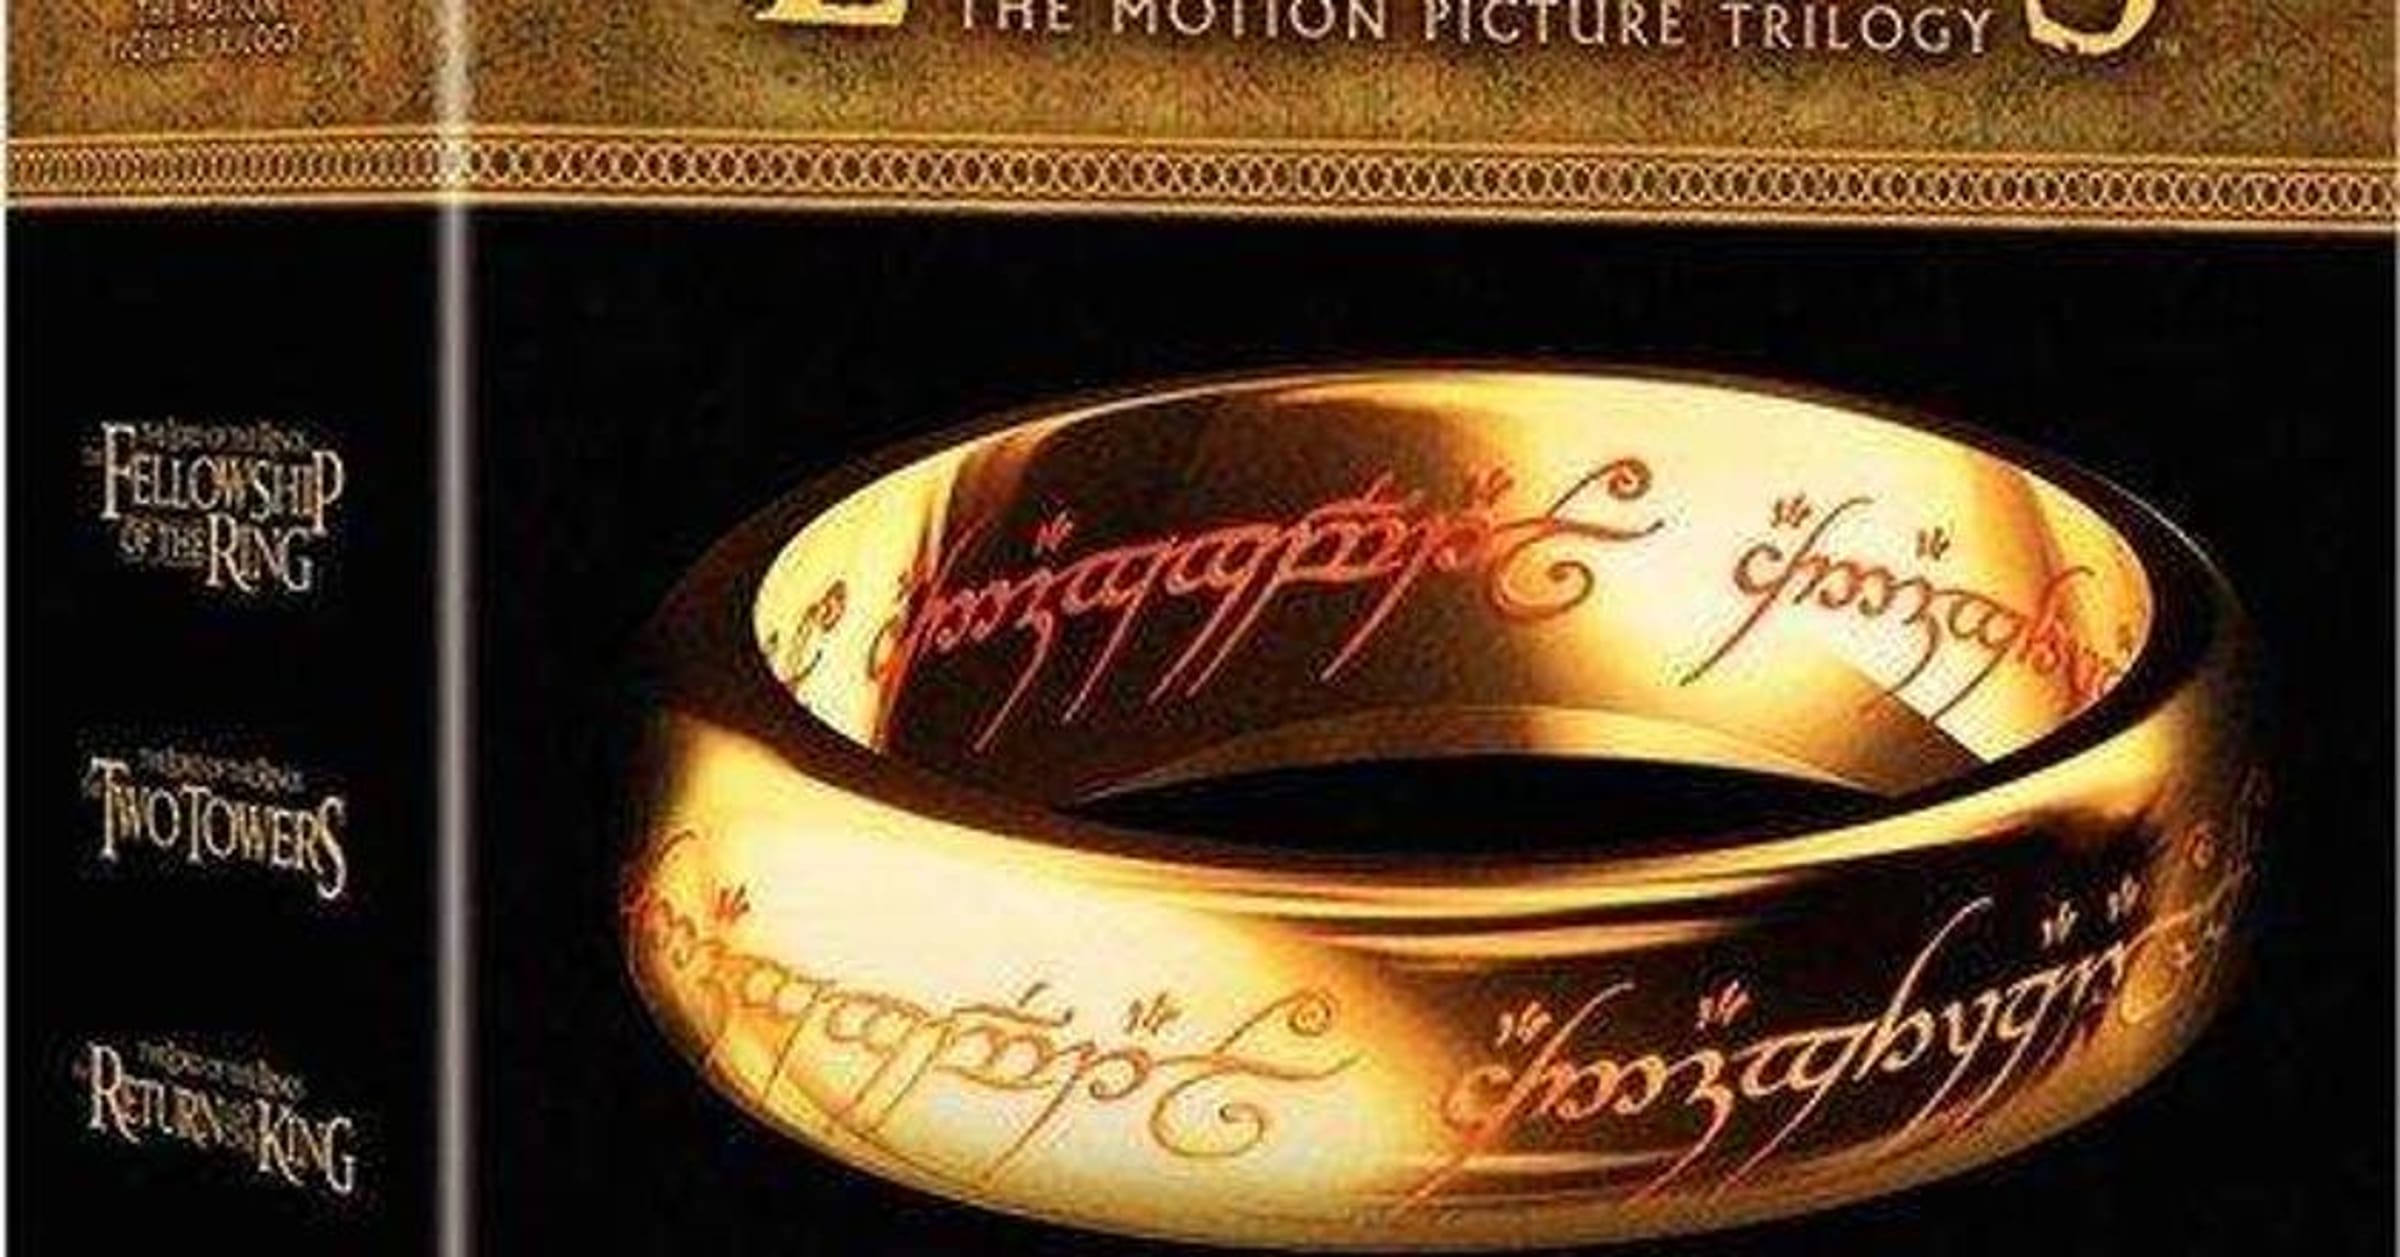 List of the Lord of the Rings film trilogy characters and cast members, The One Wiki to Rule Them All